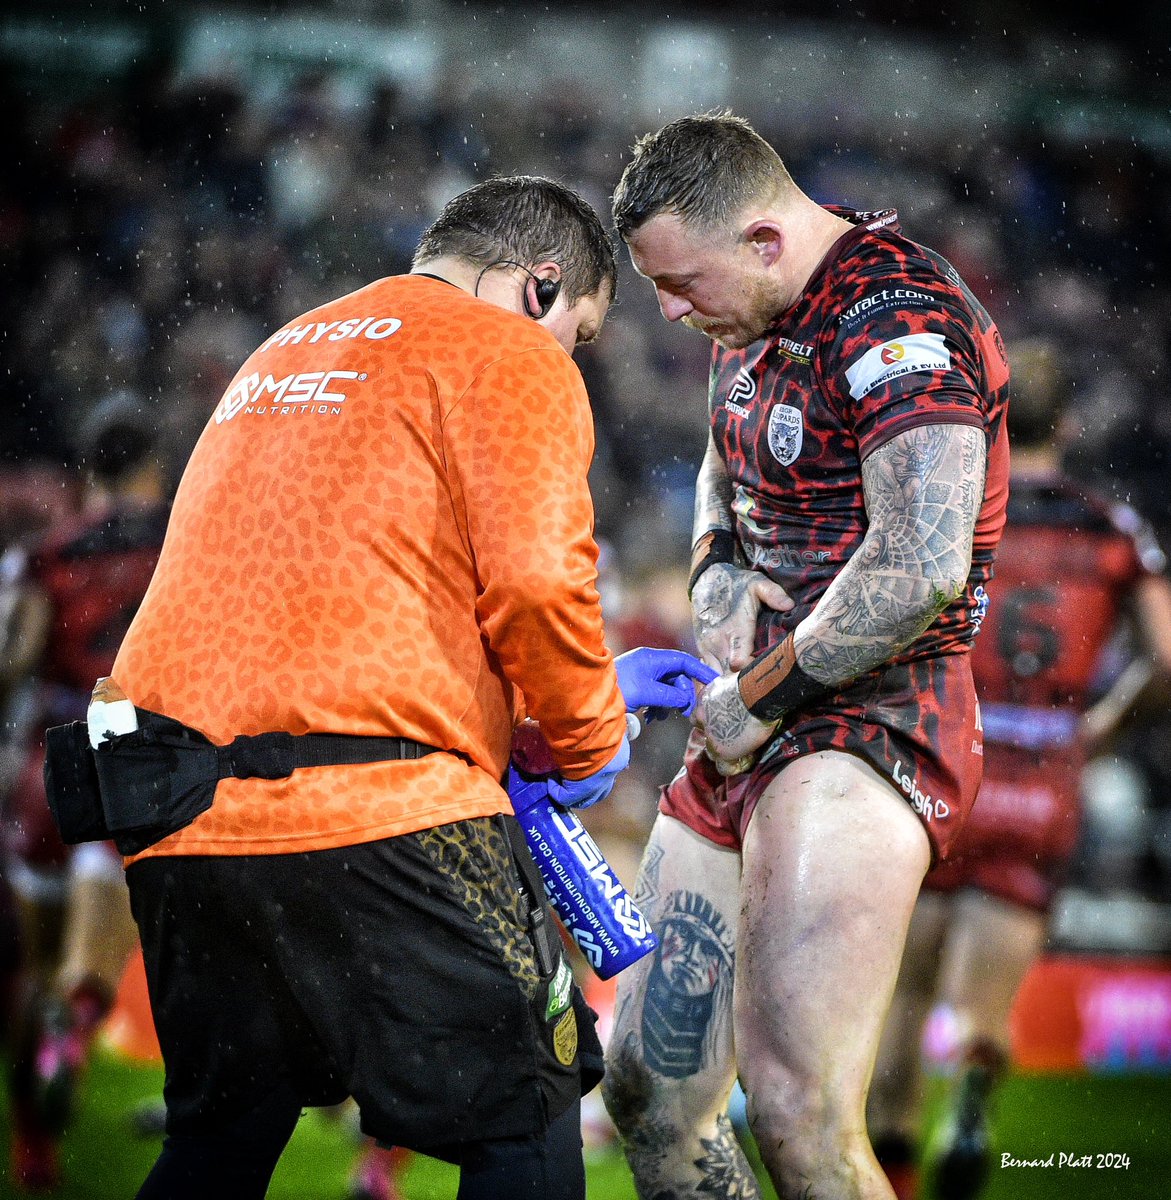 Are you thinking about getting some more ink @joshuacharnley 😂 @leighrlfc @superleague @TheRFL #tattoo